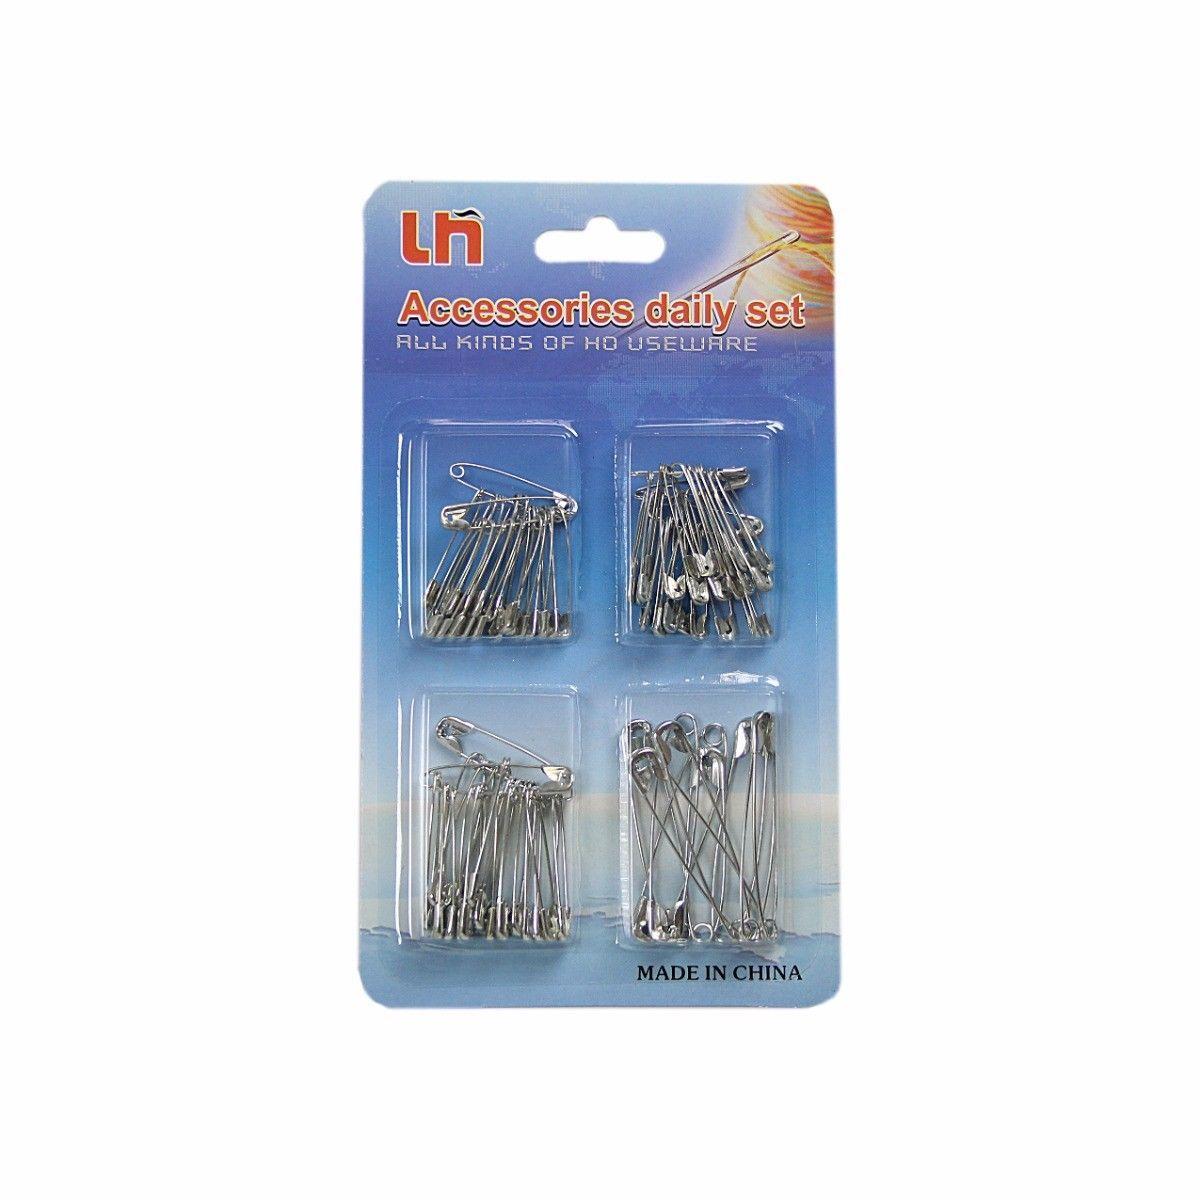 Assorted Size Pack Of Safety Pins Accessory Set 0645 (Large Letter Rate)